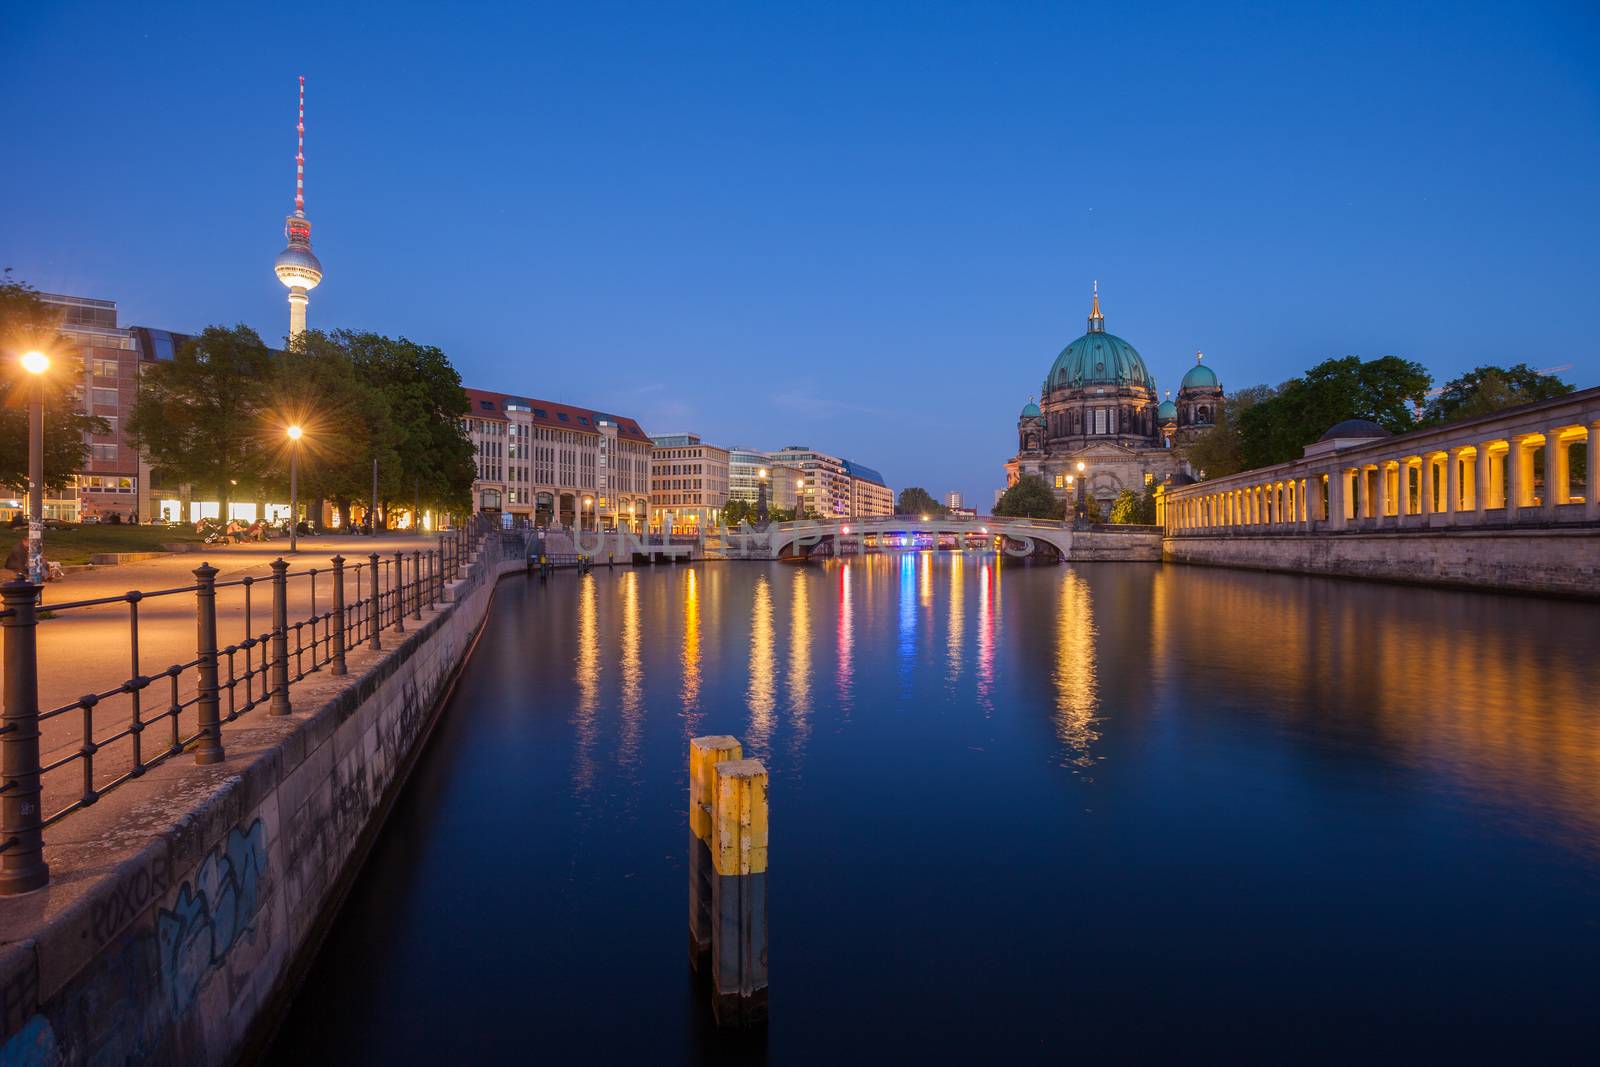 Berlin's River Spree, the Berliner Dom, and TV Tower (Fernsehturm) at twilight